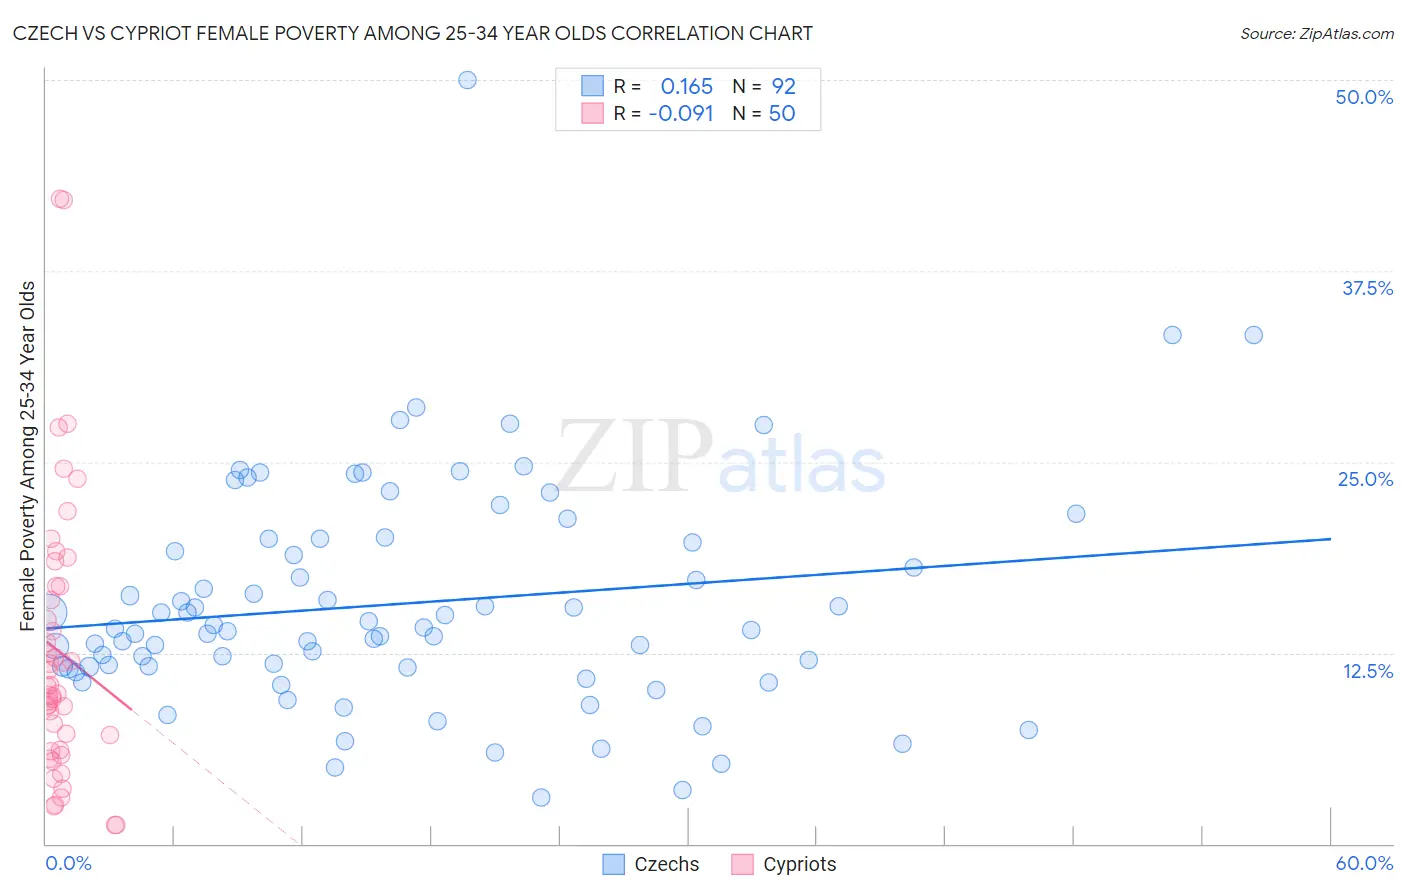 Czech vs Cypriot Female Poverty Among 25-34 Year Olds